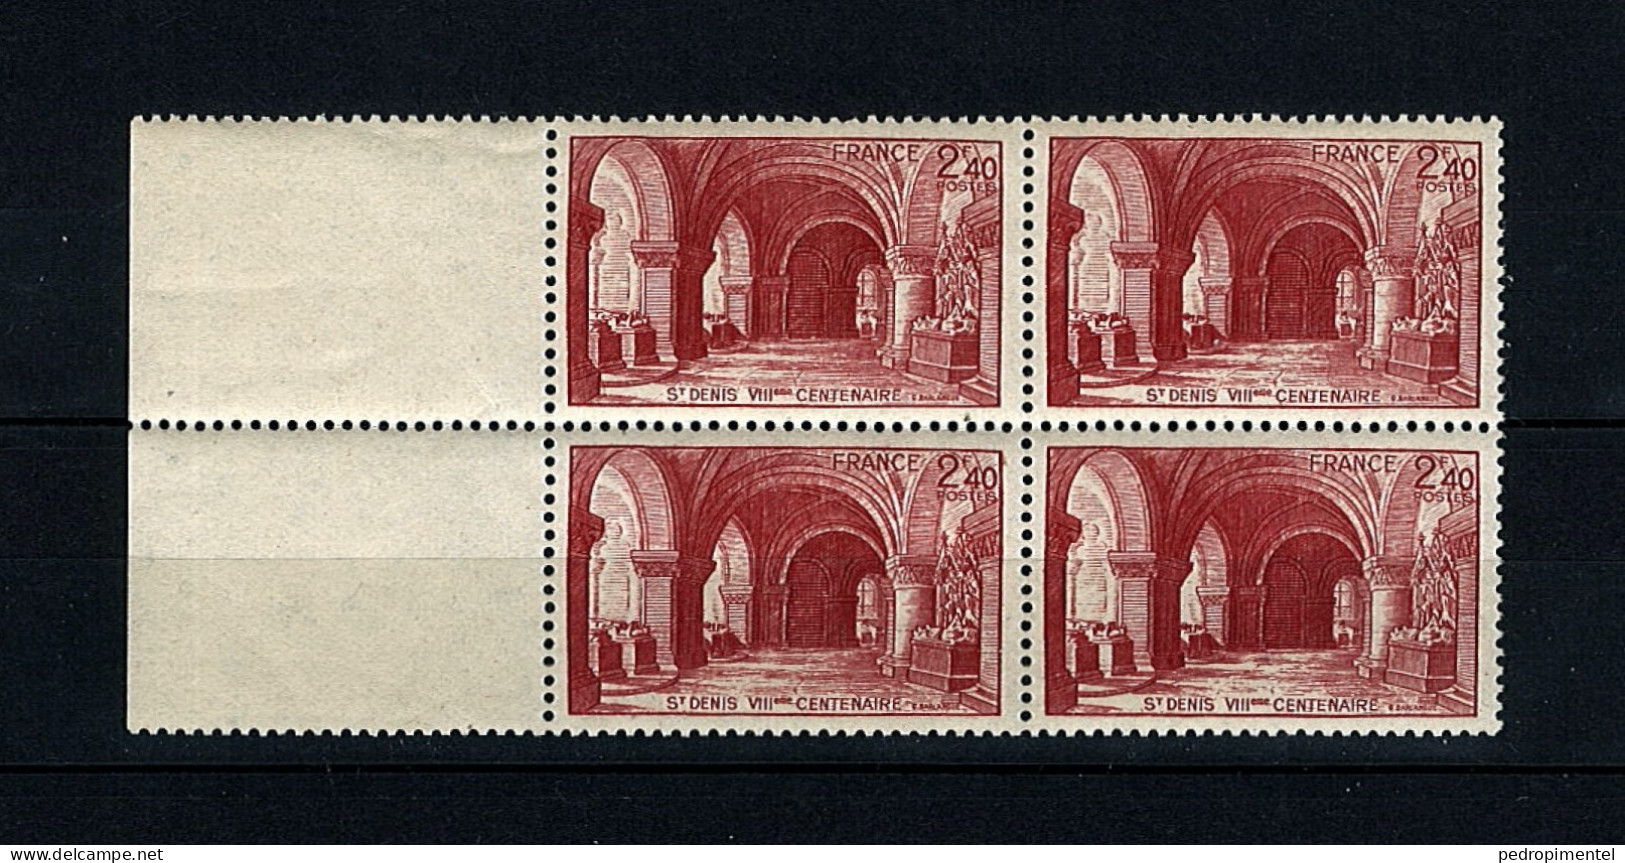 France Stamps | 1944 | The 800th Anniversay Of St Denis  | MNH #648 - Ungebraucht